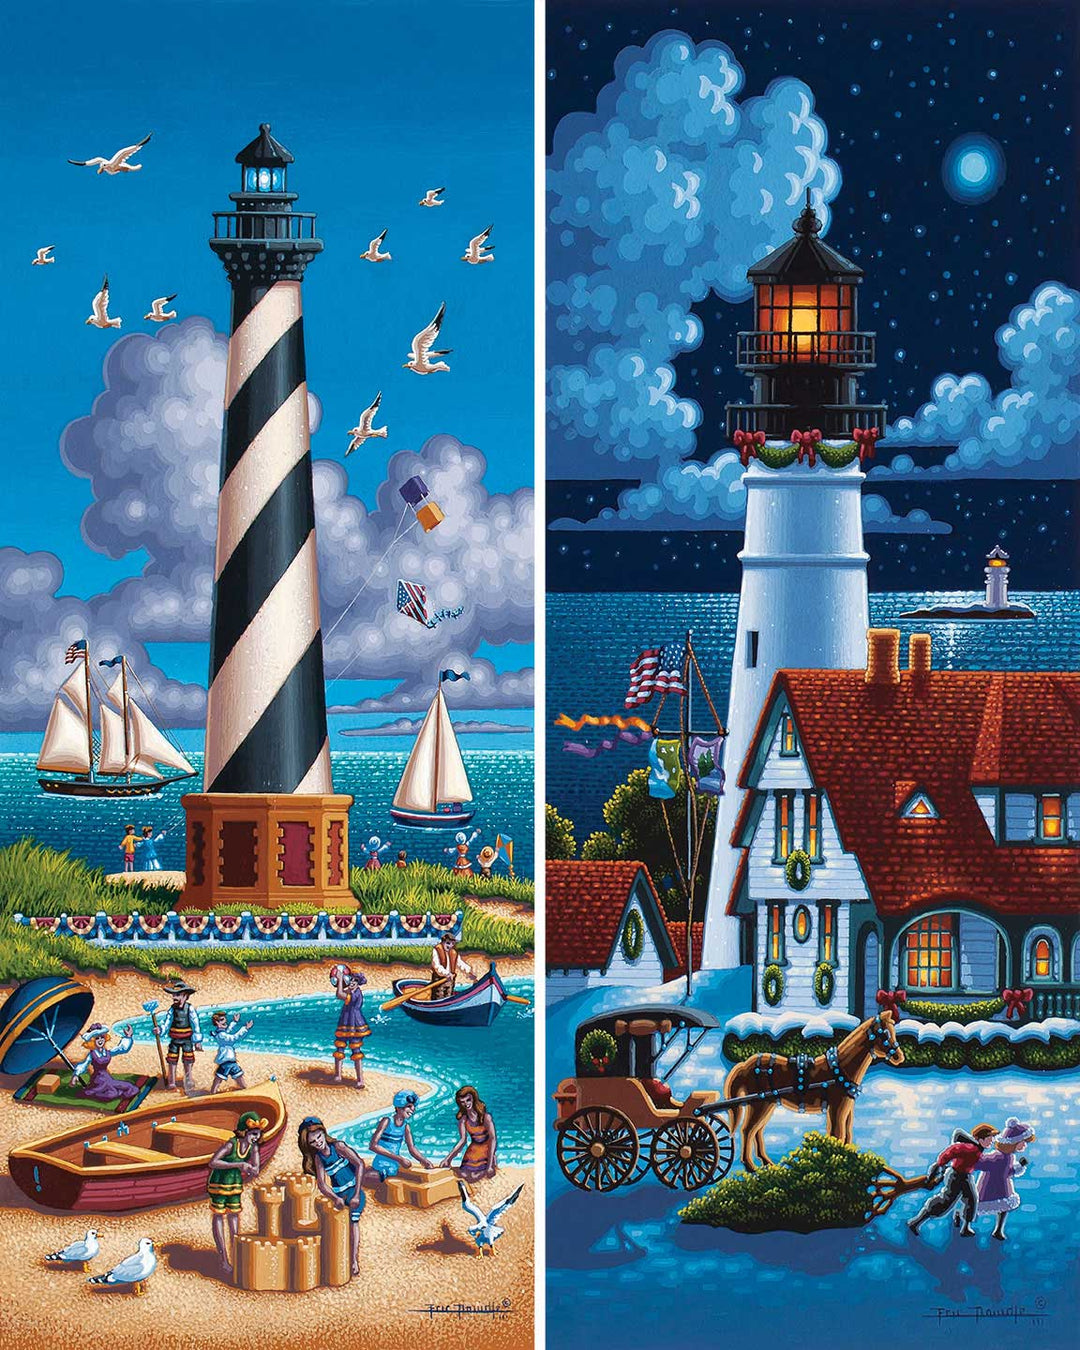 Lighthouses North - 500 Piece